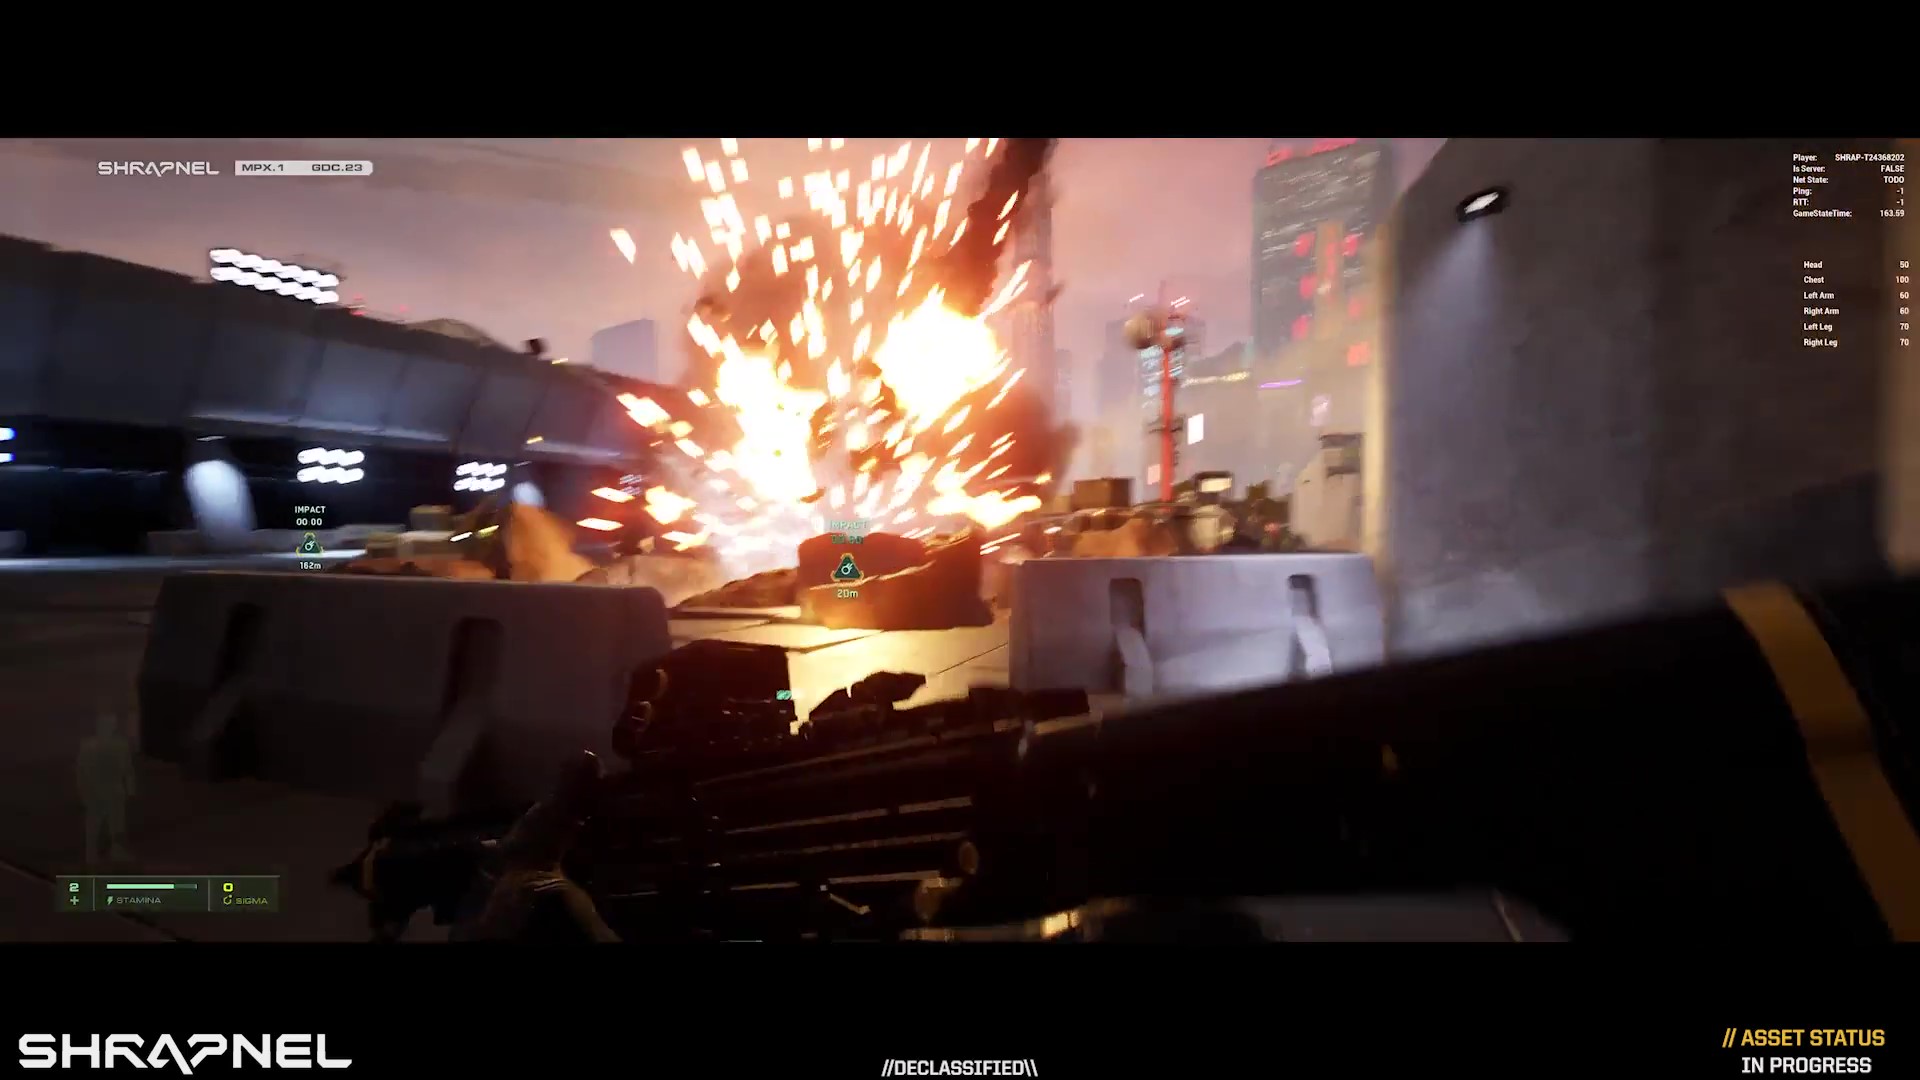 Players can experience several explosions in the game. Once they get hit by these explosions, a significant amount of damage will be deducted from their health. 